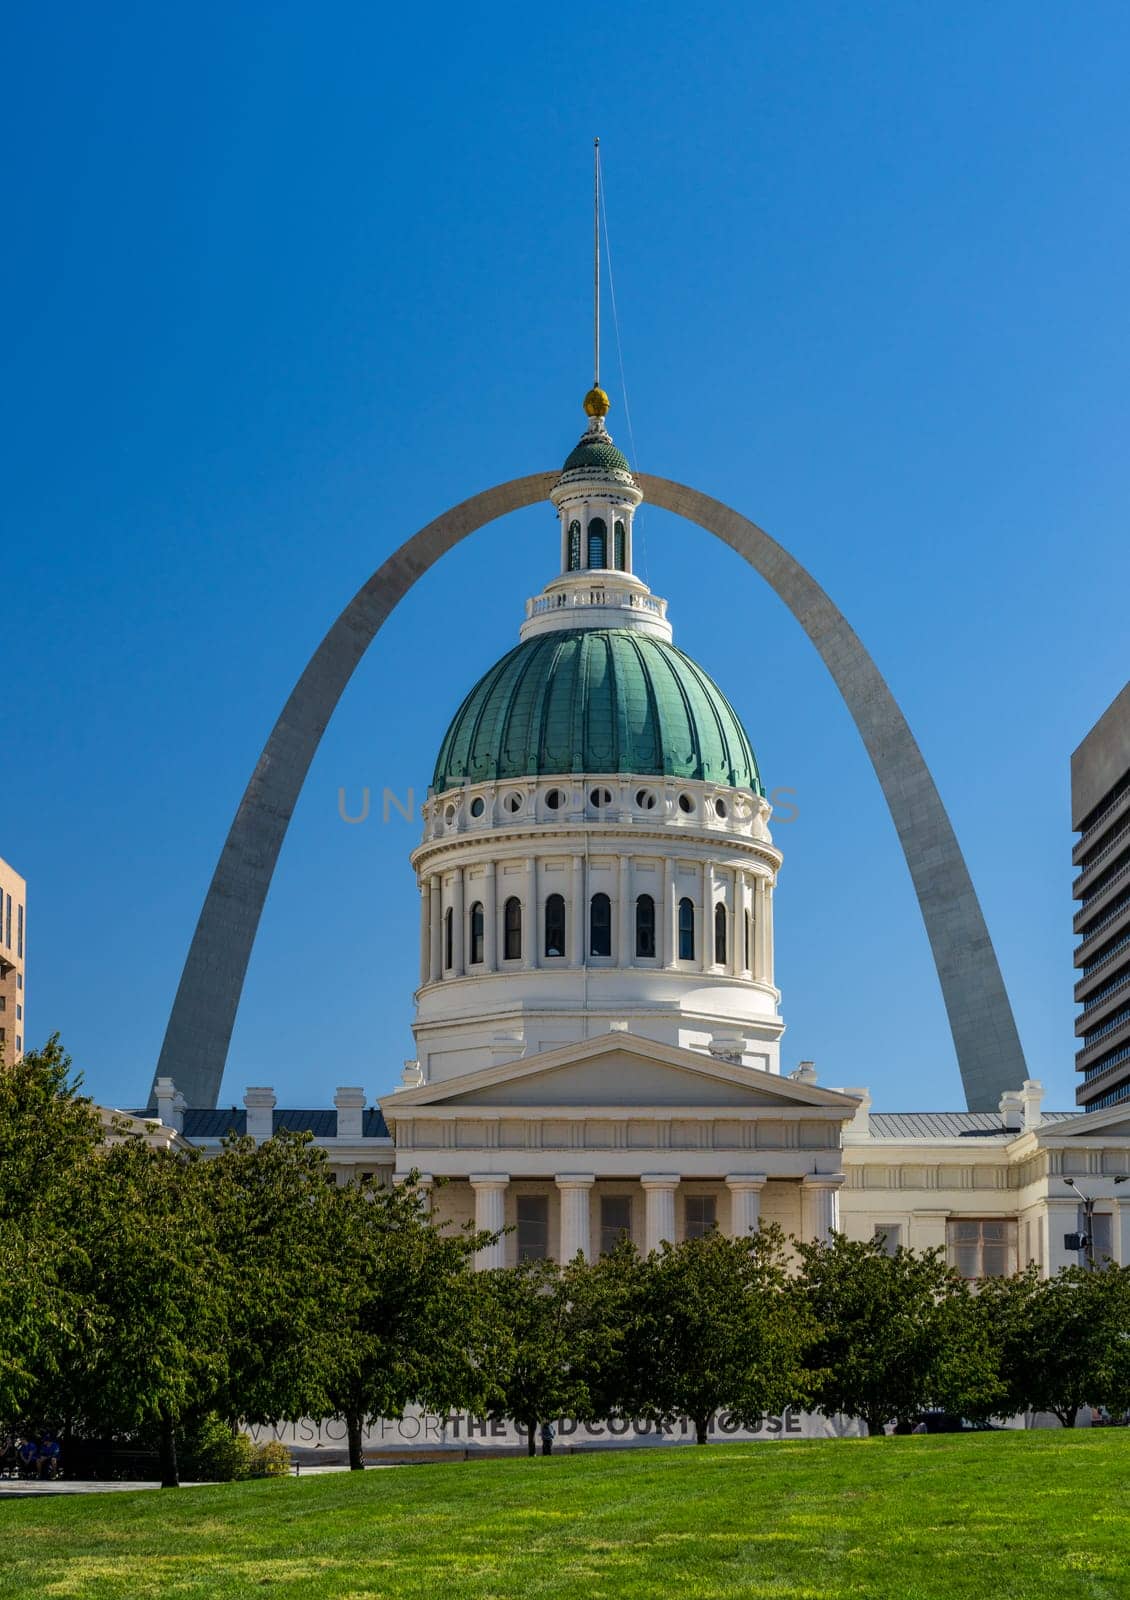 Dome of Old Courthouse in St Louis Missouri against Gateway arch by steheap